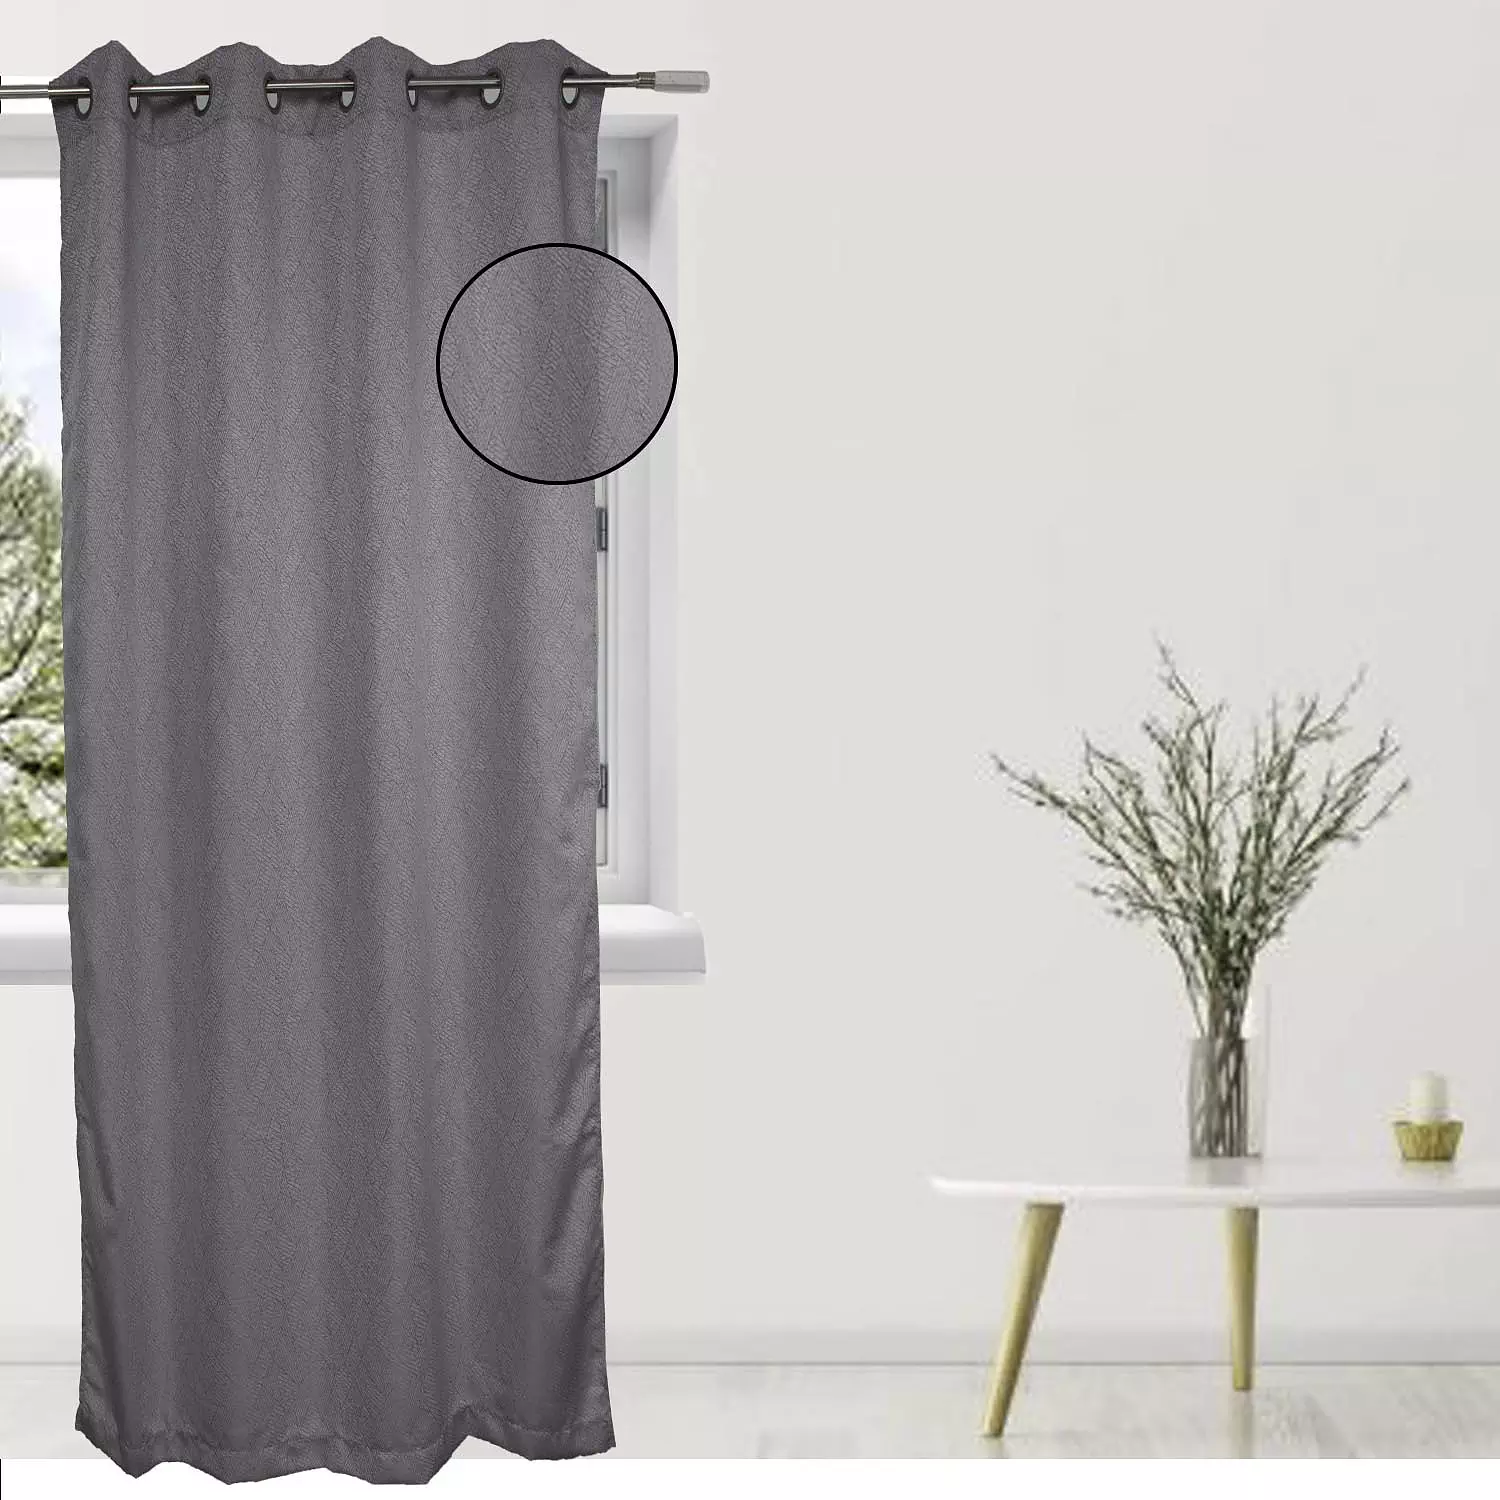 Vania, jacquard curtain with metal grommets, 54"x84", grey